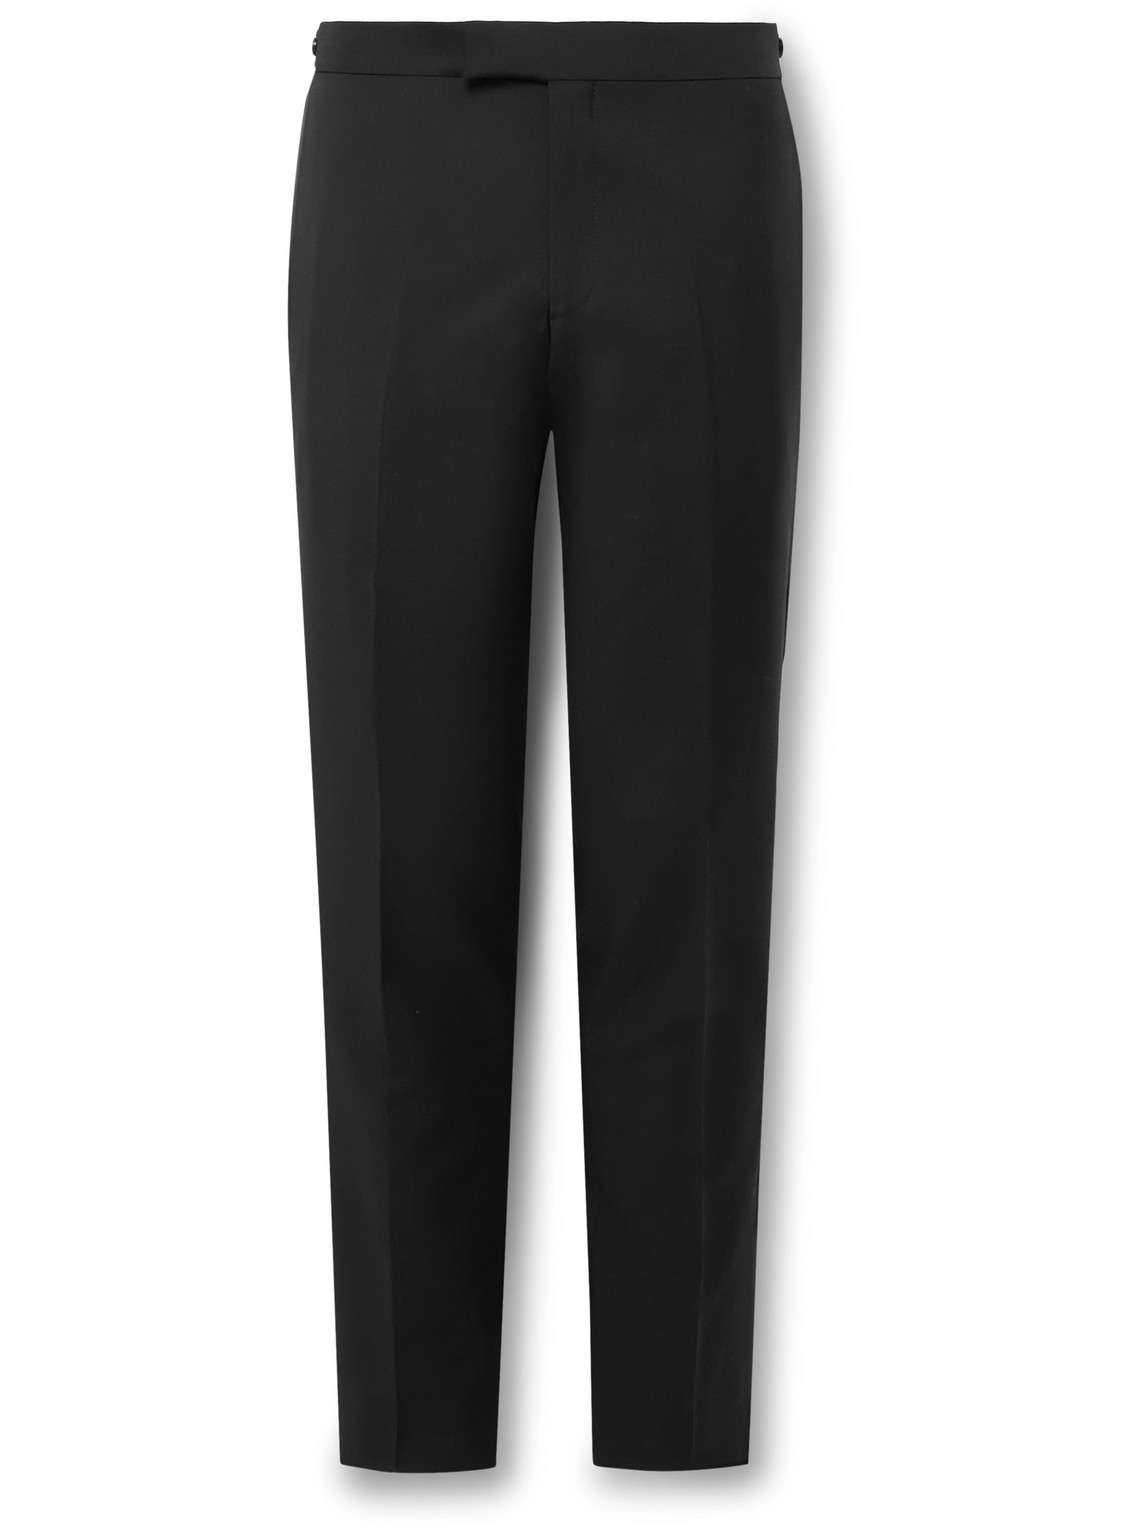 Paul Smith Slim-Fit Satin-Trimmed Wool and Mohair-Blend Tuxedo Trousers